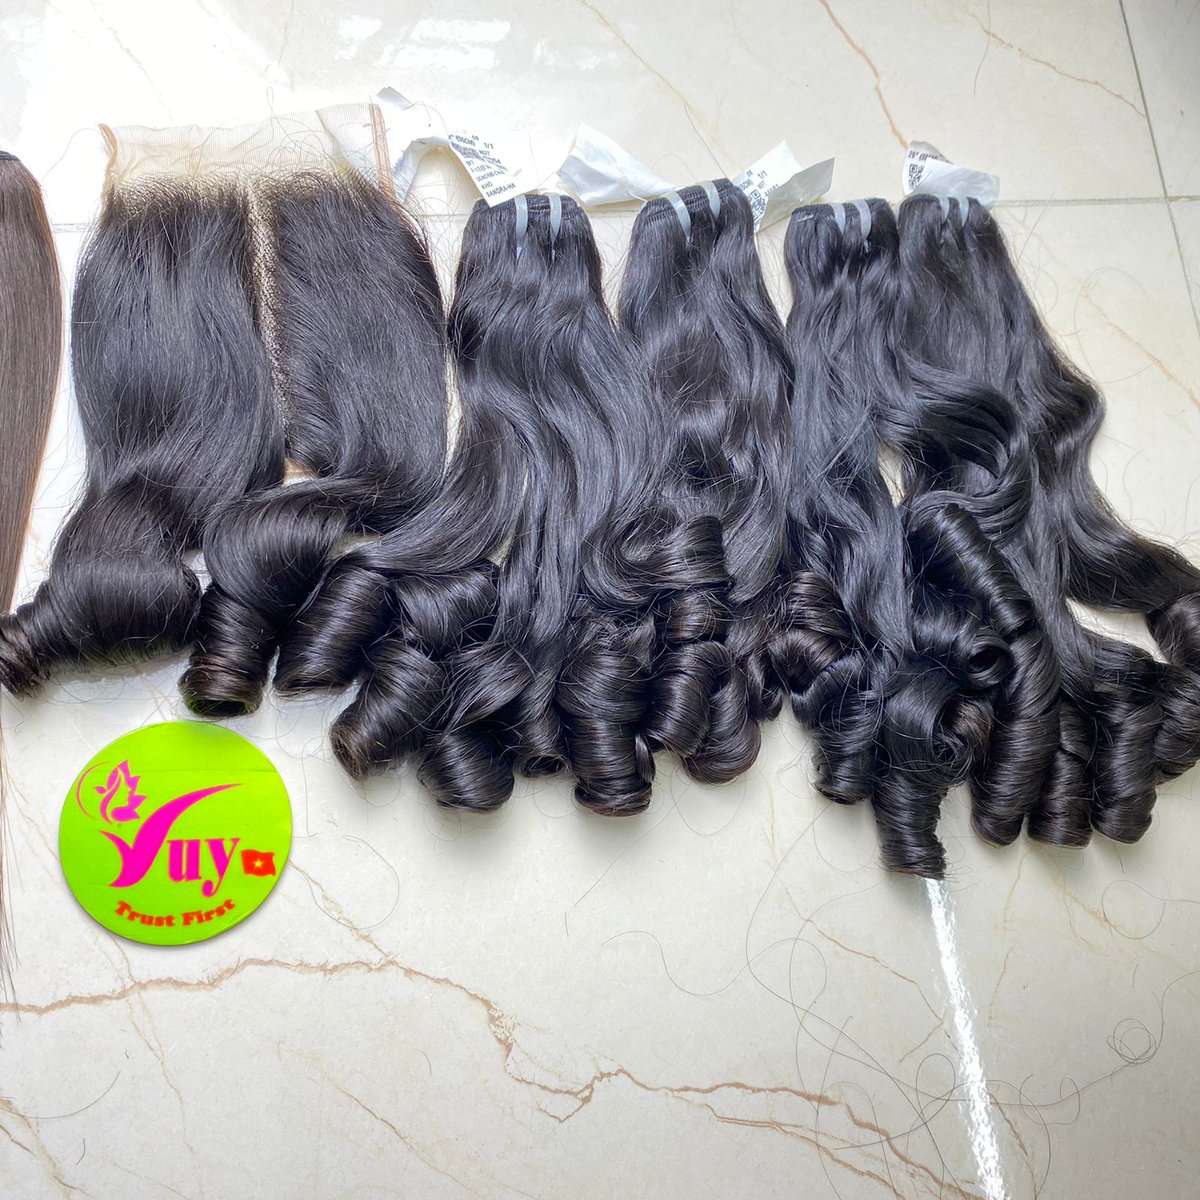 Baby Thin Hair Extensions
🥰Contact With Me On Whatsapp +84396092128
#RawHairExtensions #NaturalHairExtensions #RawVirginHair #UnprocessedHair #RawHairVendor #HairExtensions #HairWeaves #RawIndianHair #VirginHairExtensions #RealHairExtensions #RawHairBundle #LuxuryHairExtensions